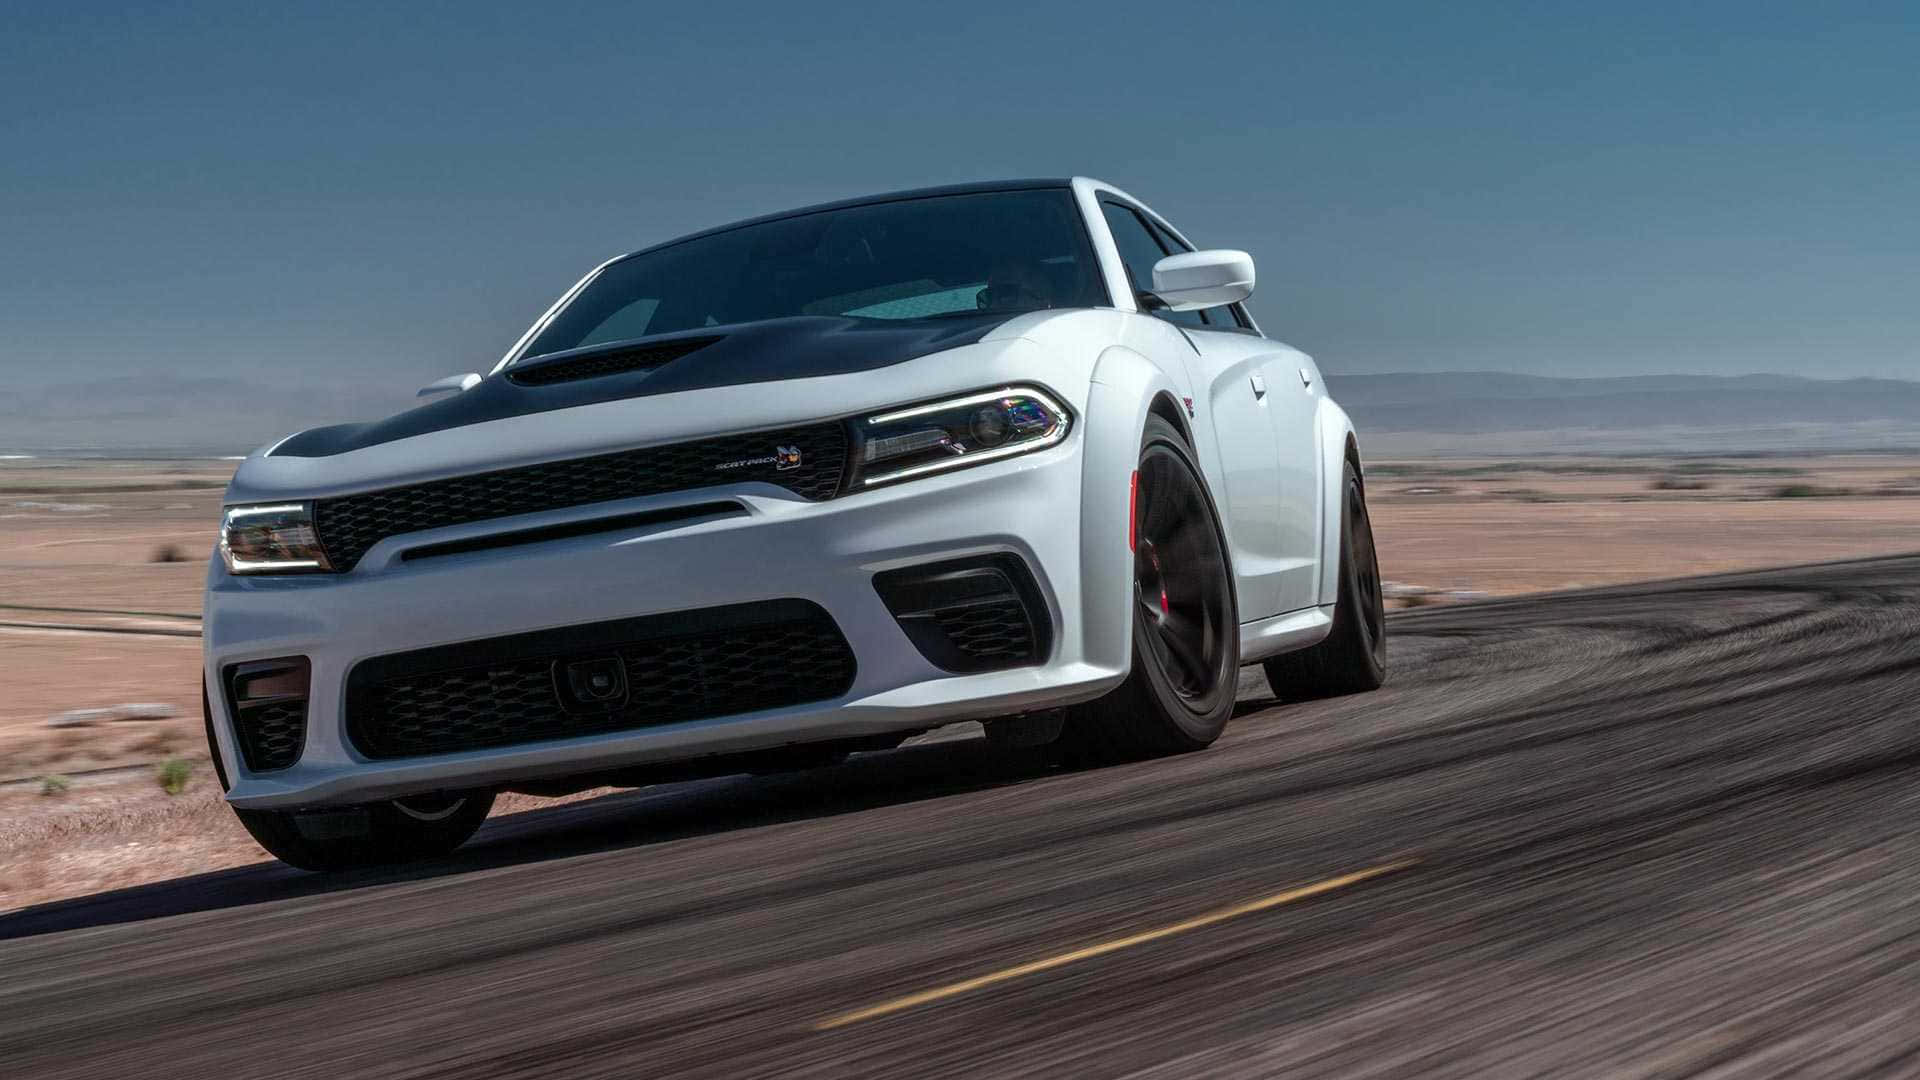 The 2020 Dodge Charger Srt Is Driving On A Desert Road Wallpaper